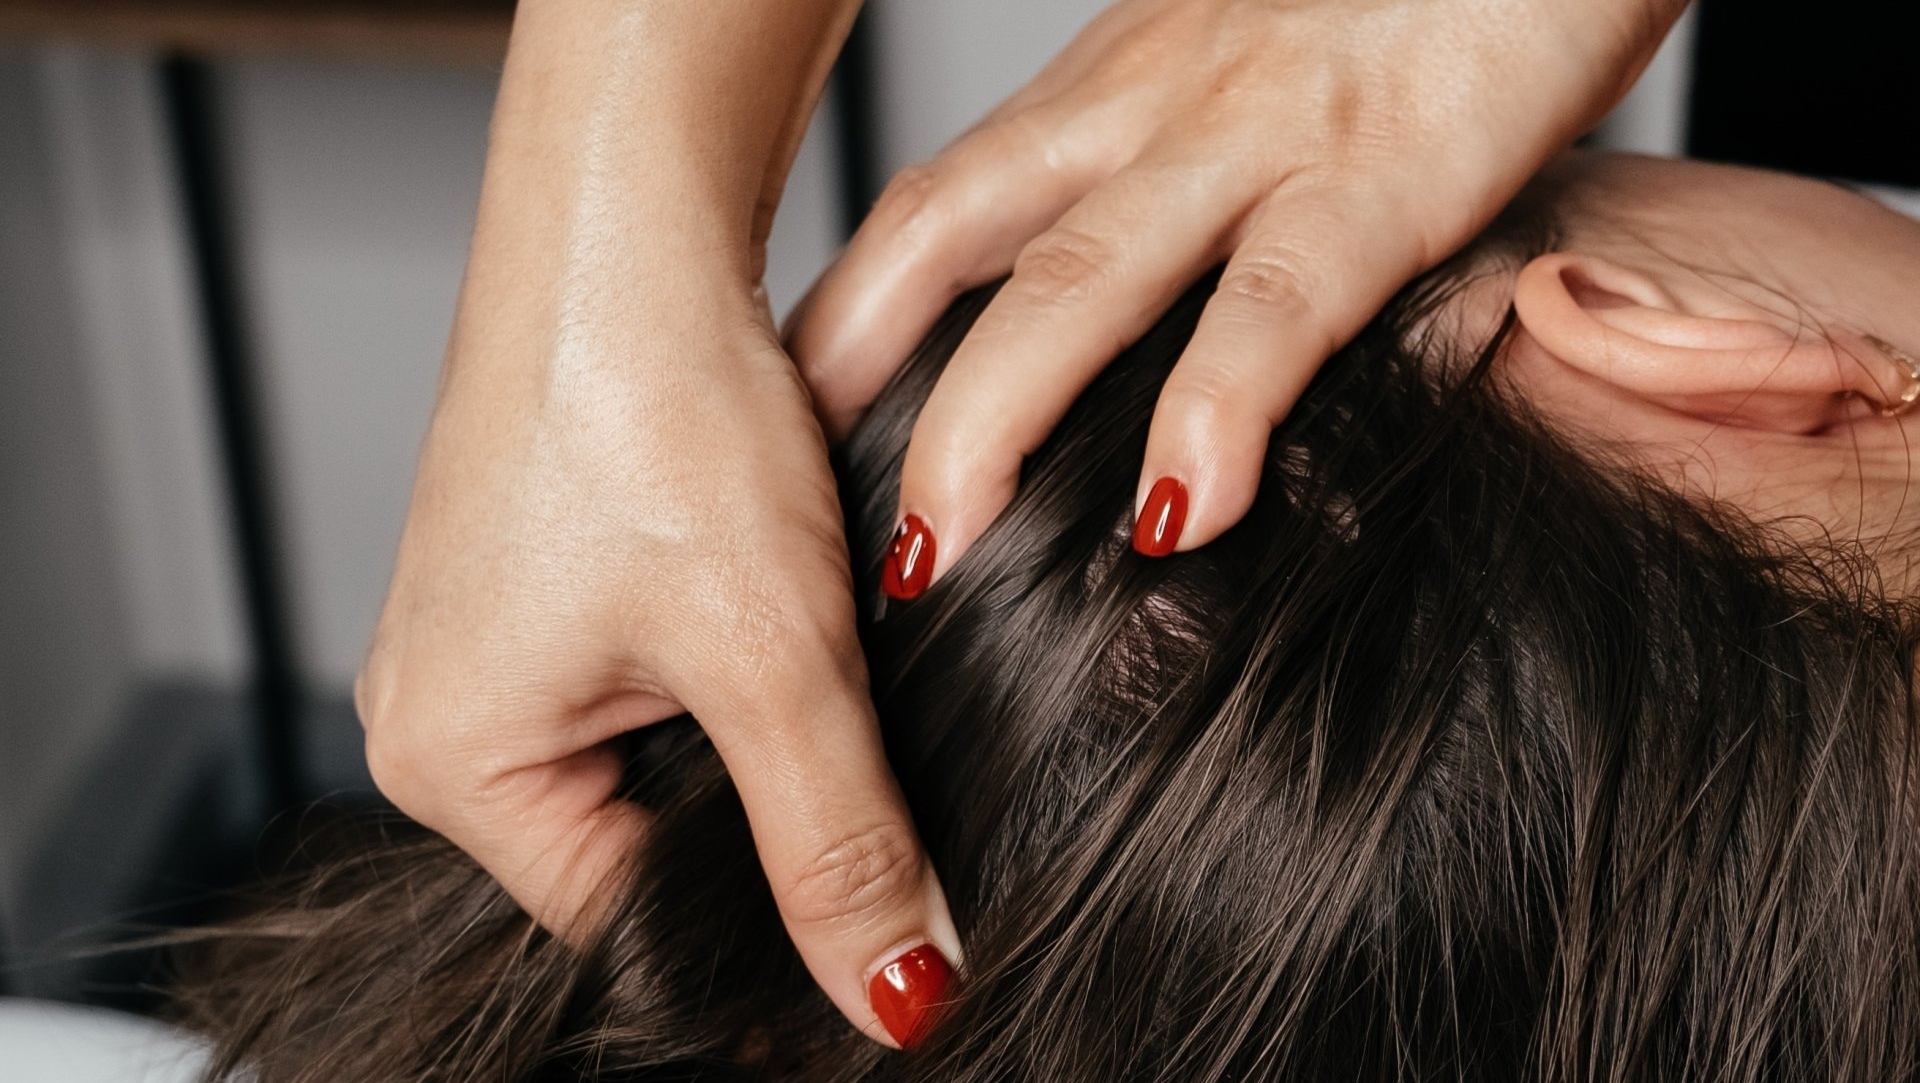 Close-up view of two well-manicured hands giving a head massage